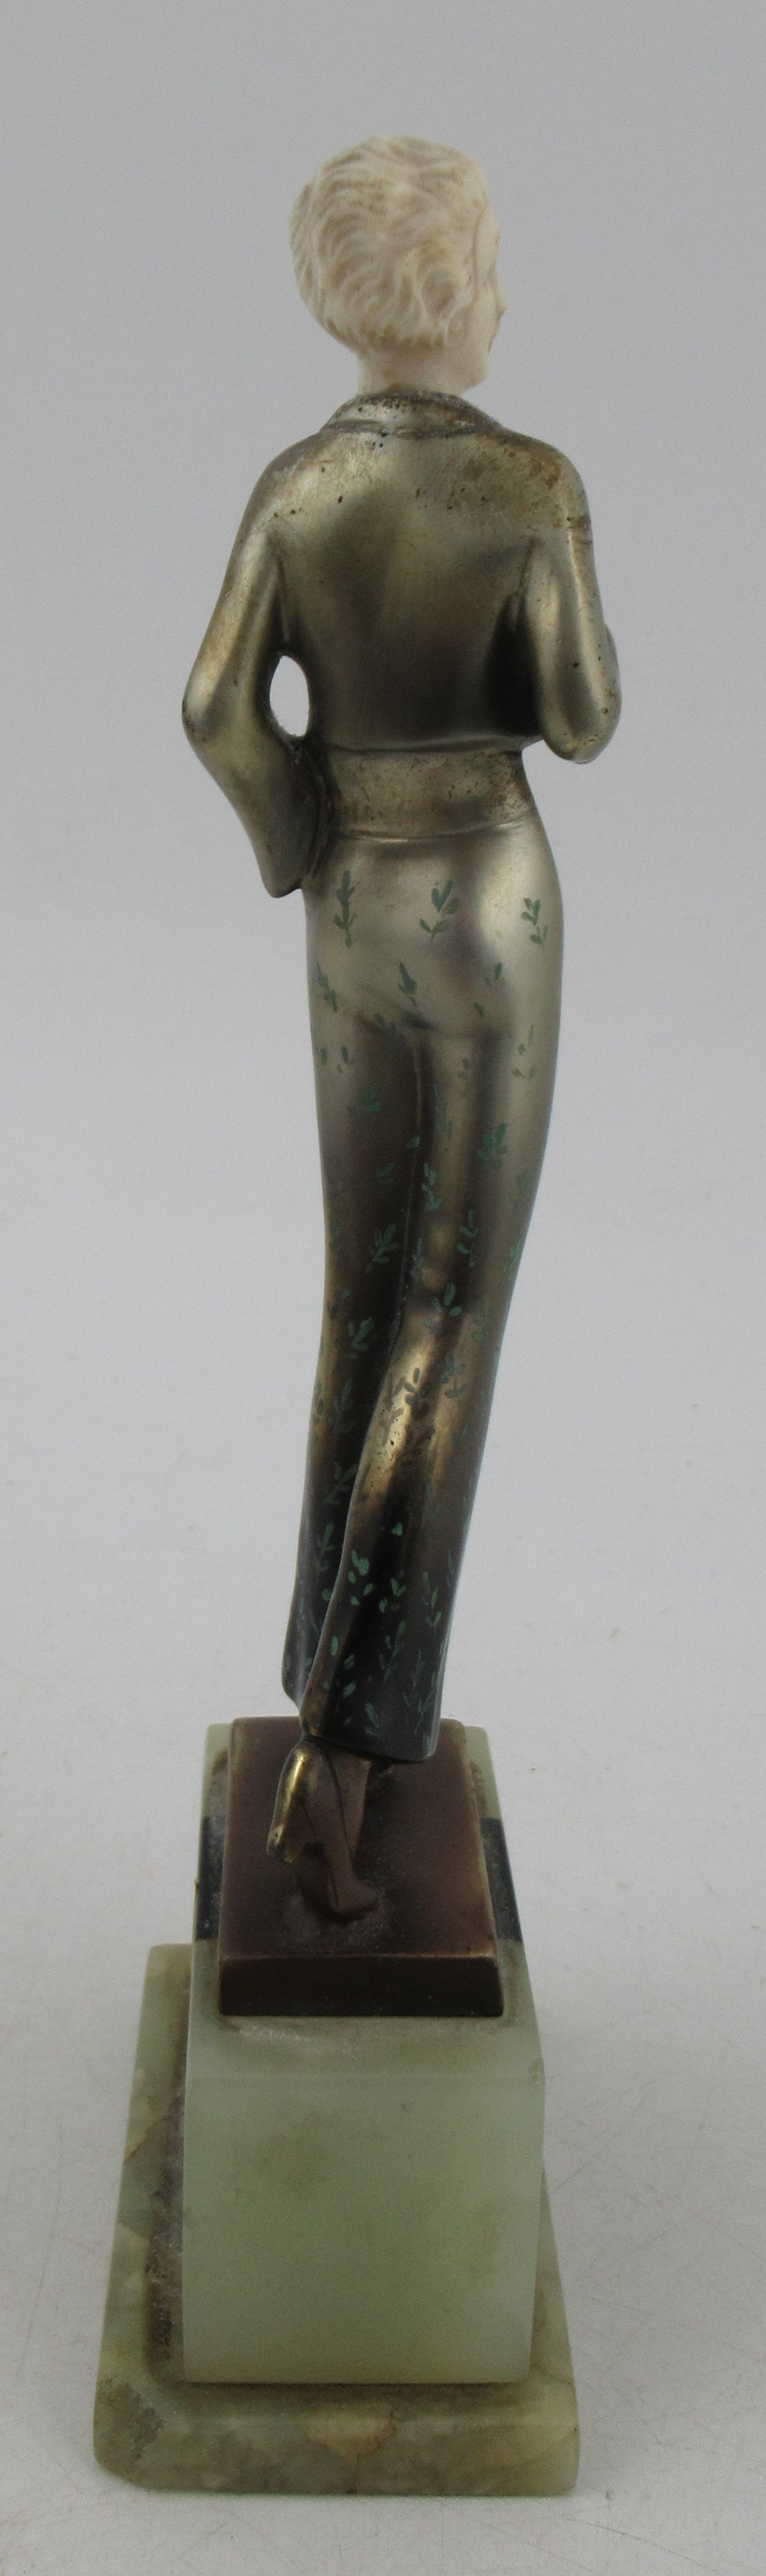 Lorenzl, a patinated bronze and ivorine figure, of a stylish Art Deco woman, signed to bronze - Image 7 of 7